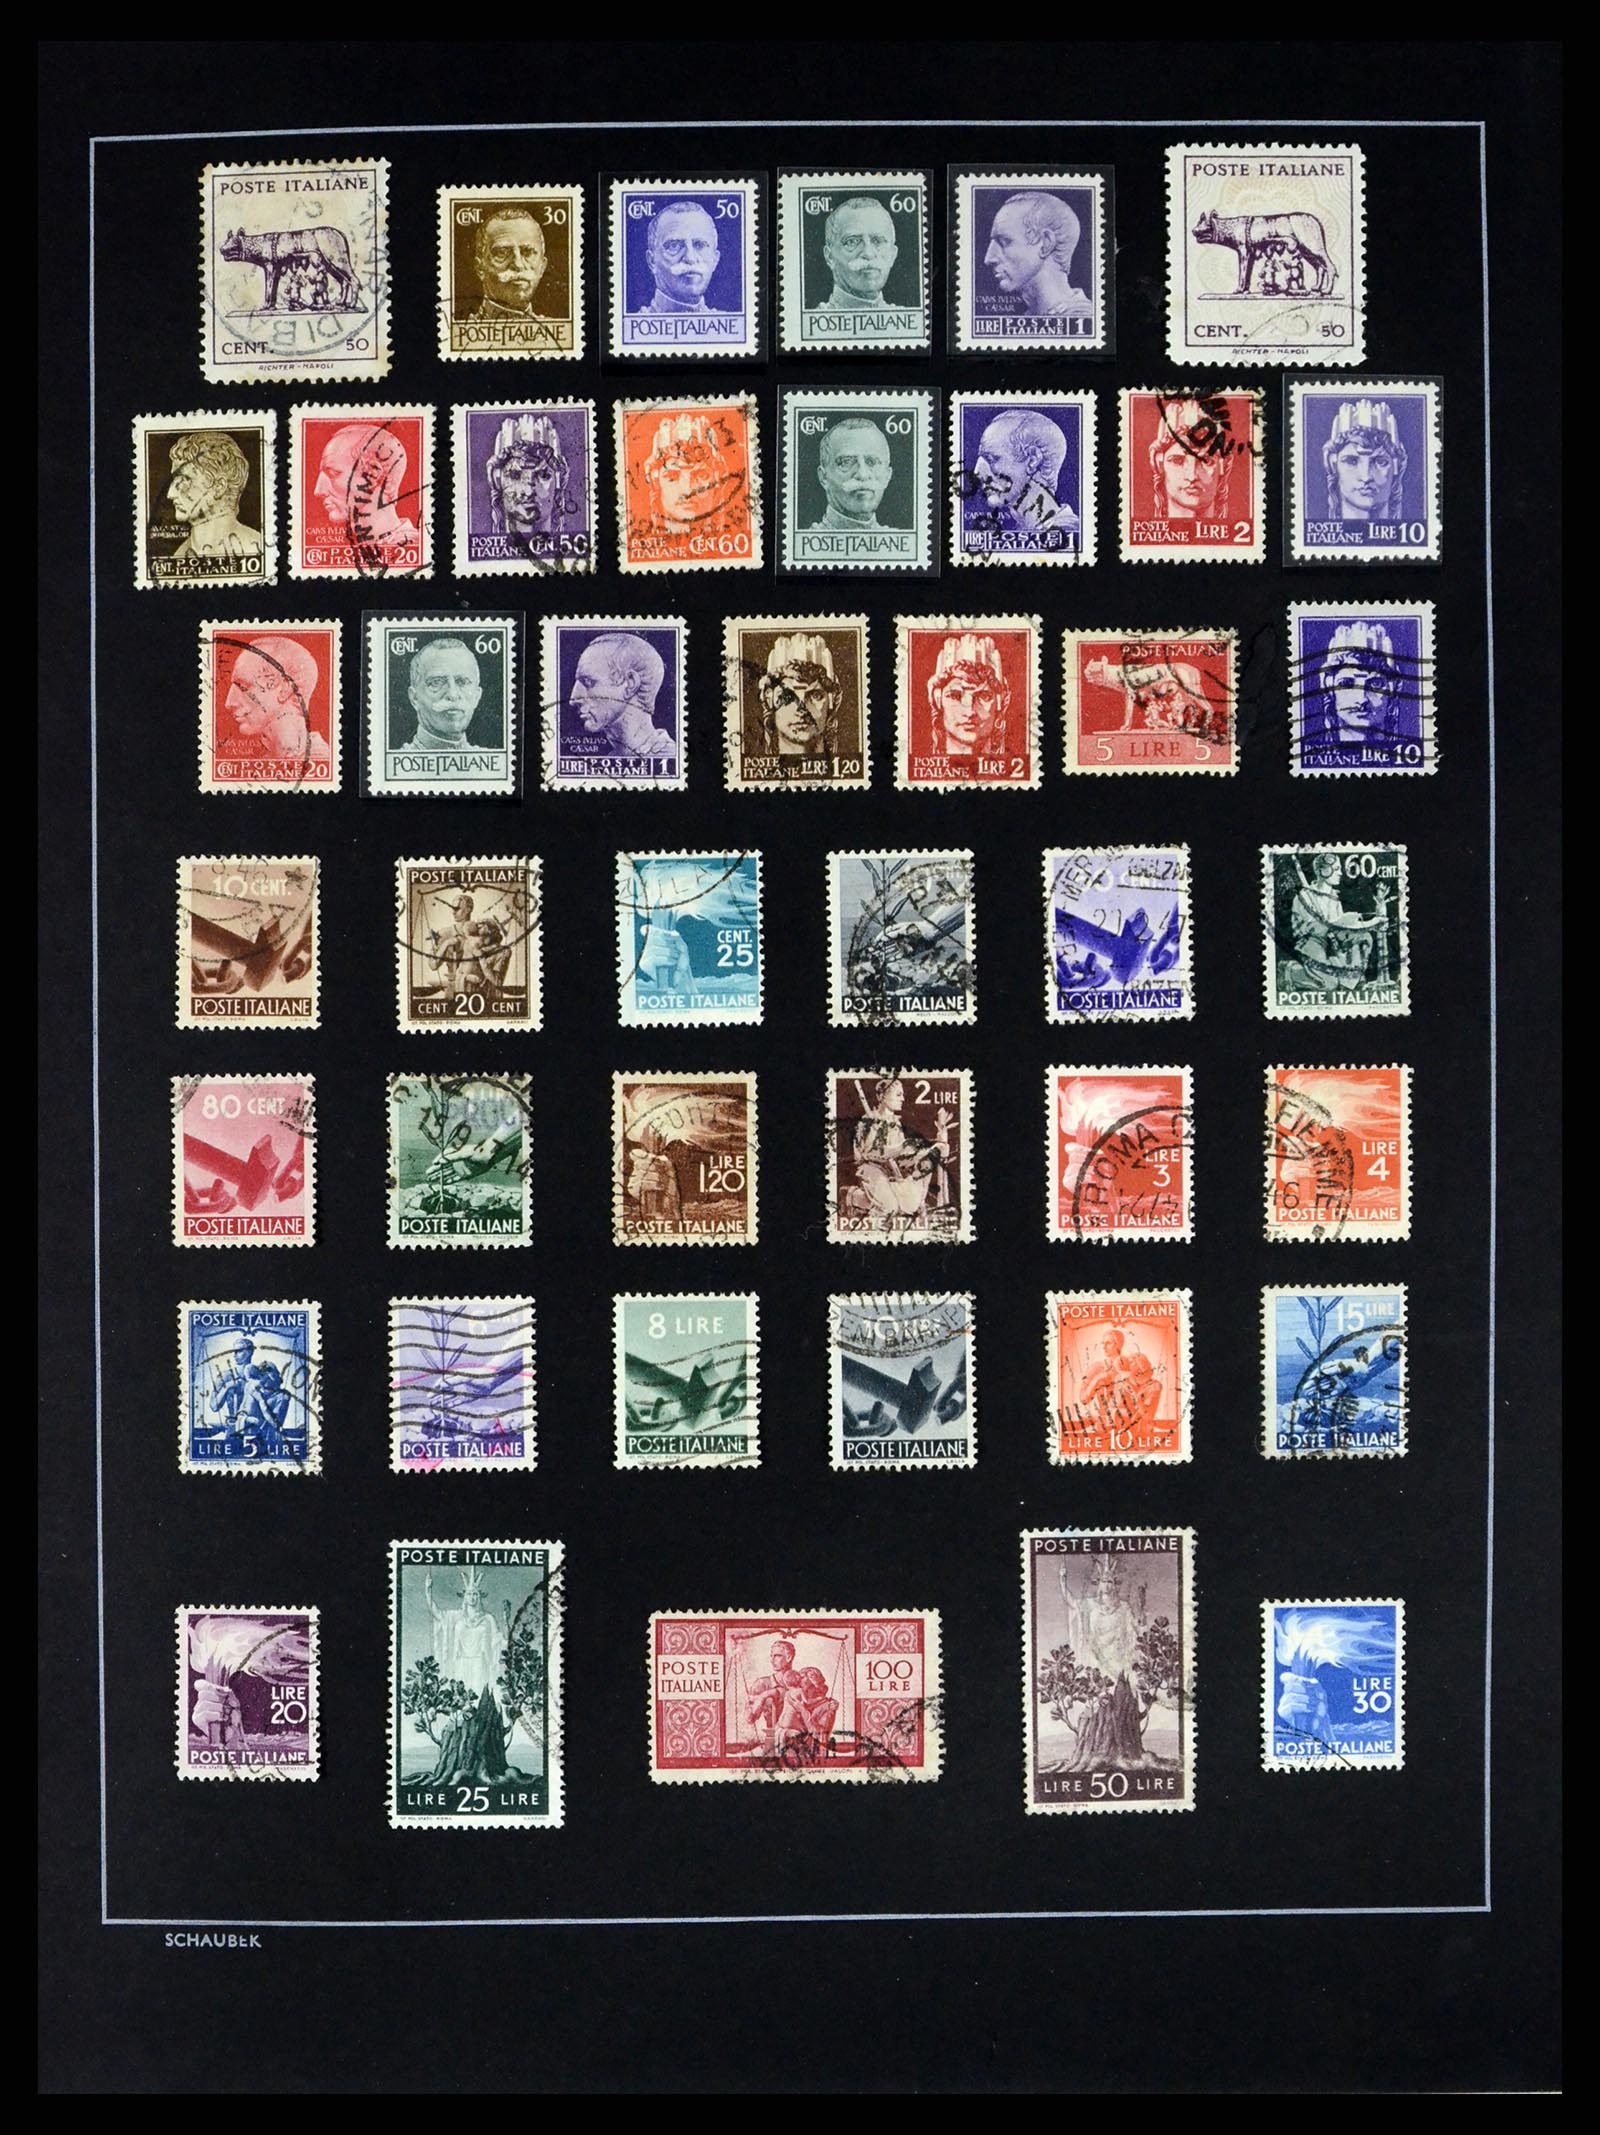 37553 027 - Stamp collection 37553 Italy 1852-1990.